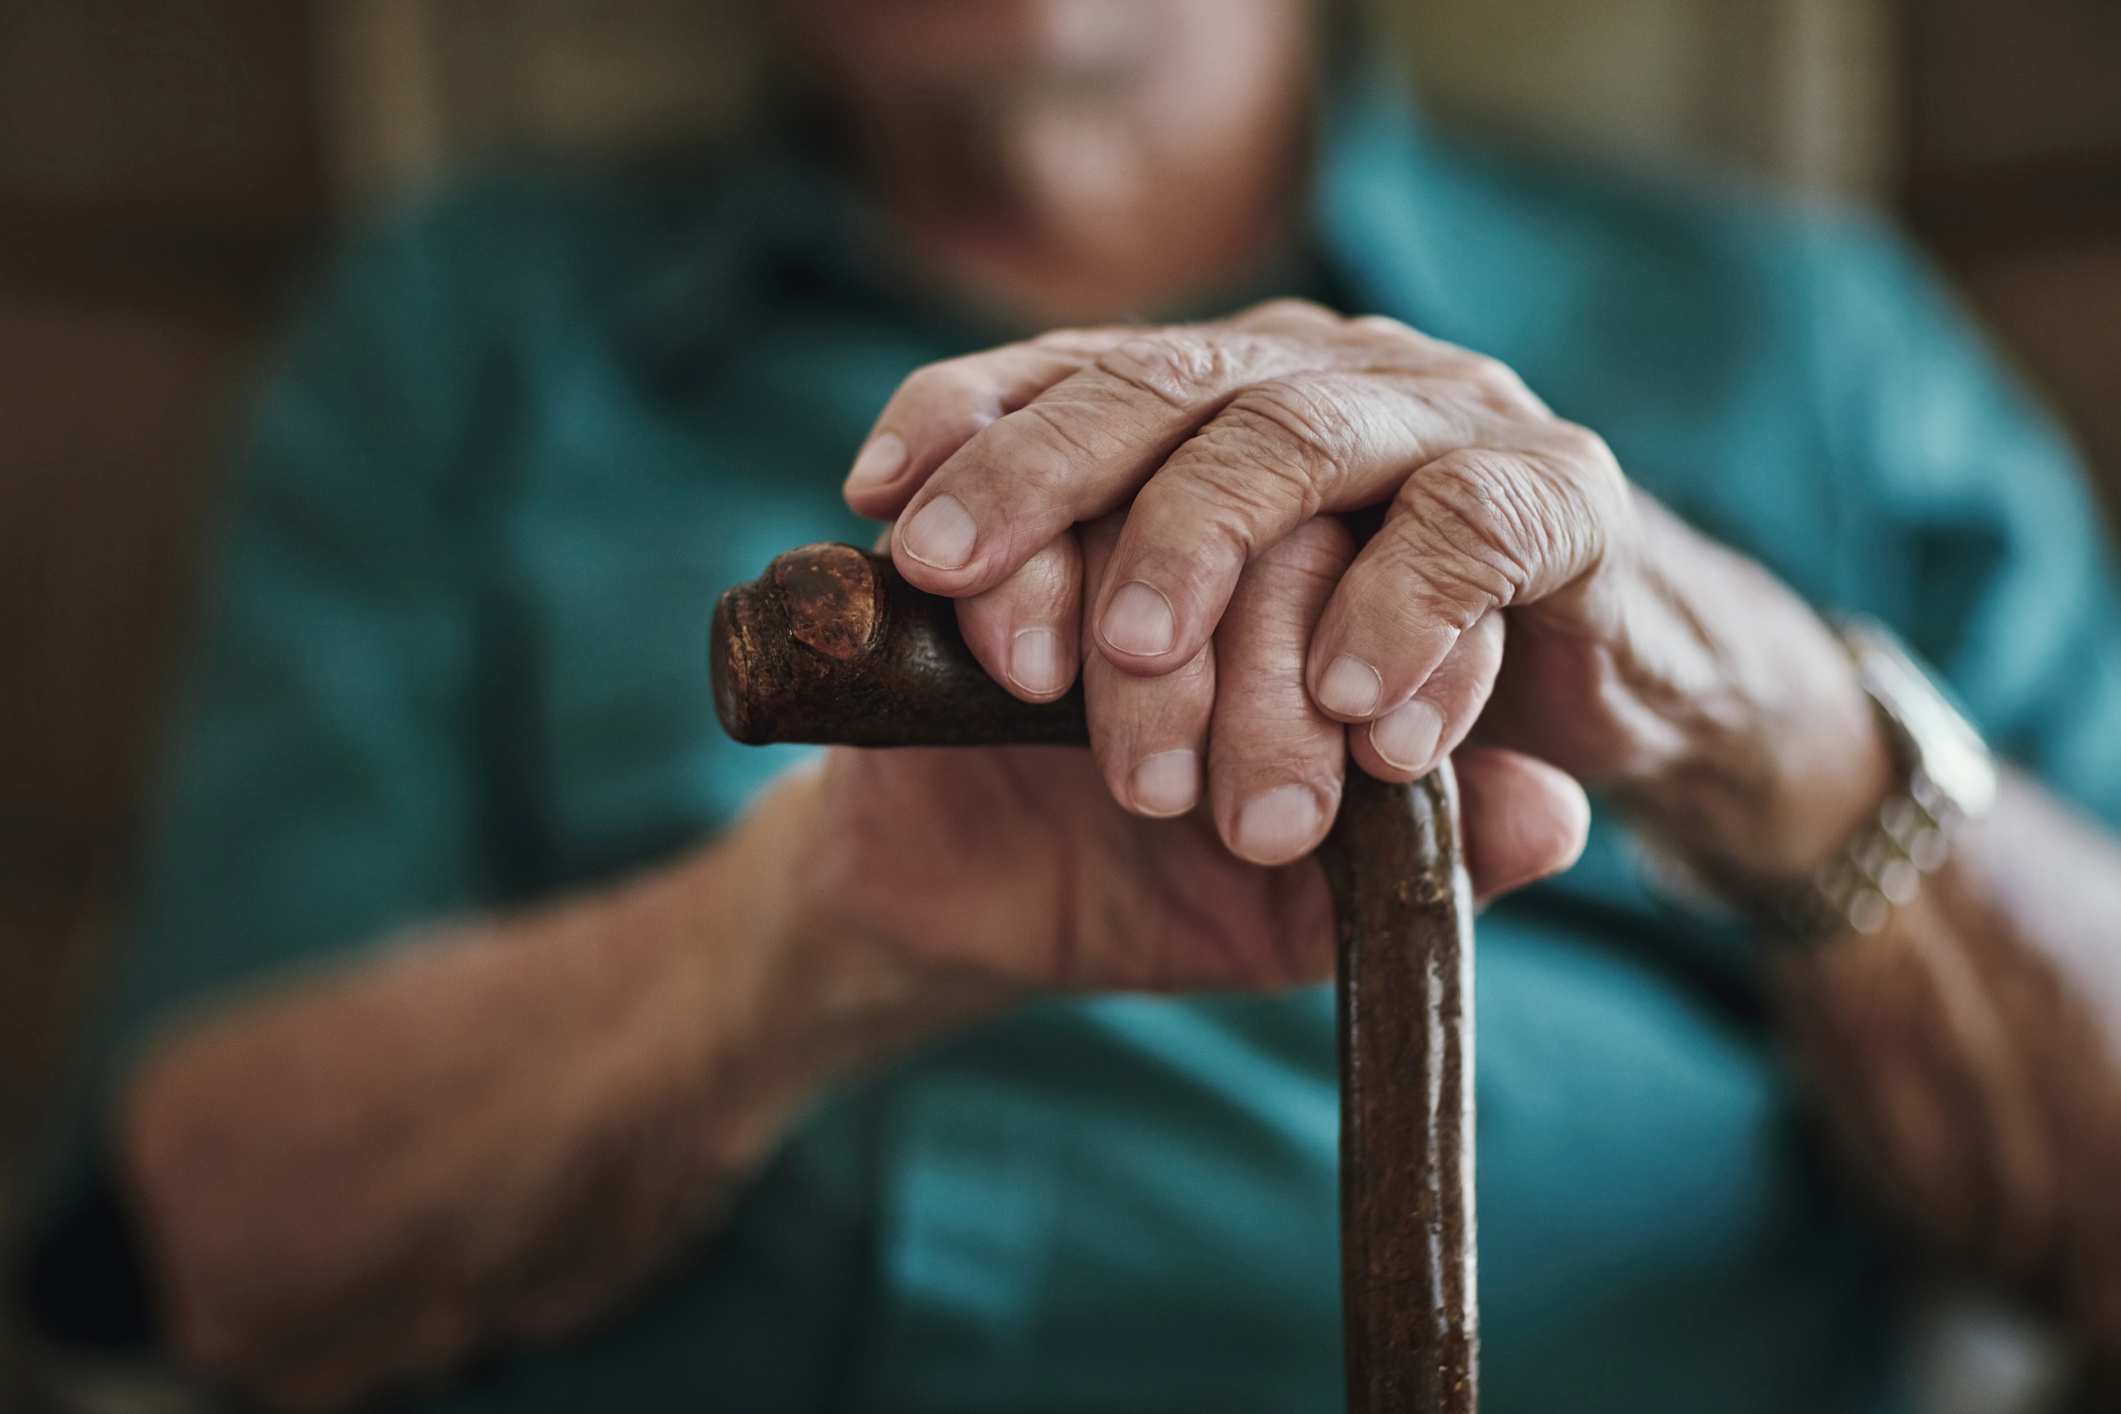 Aged care: How do we honour our obligations to the elderly?